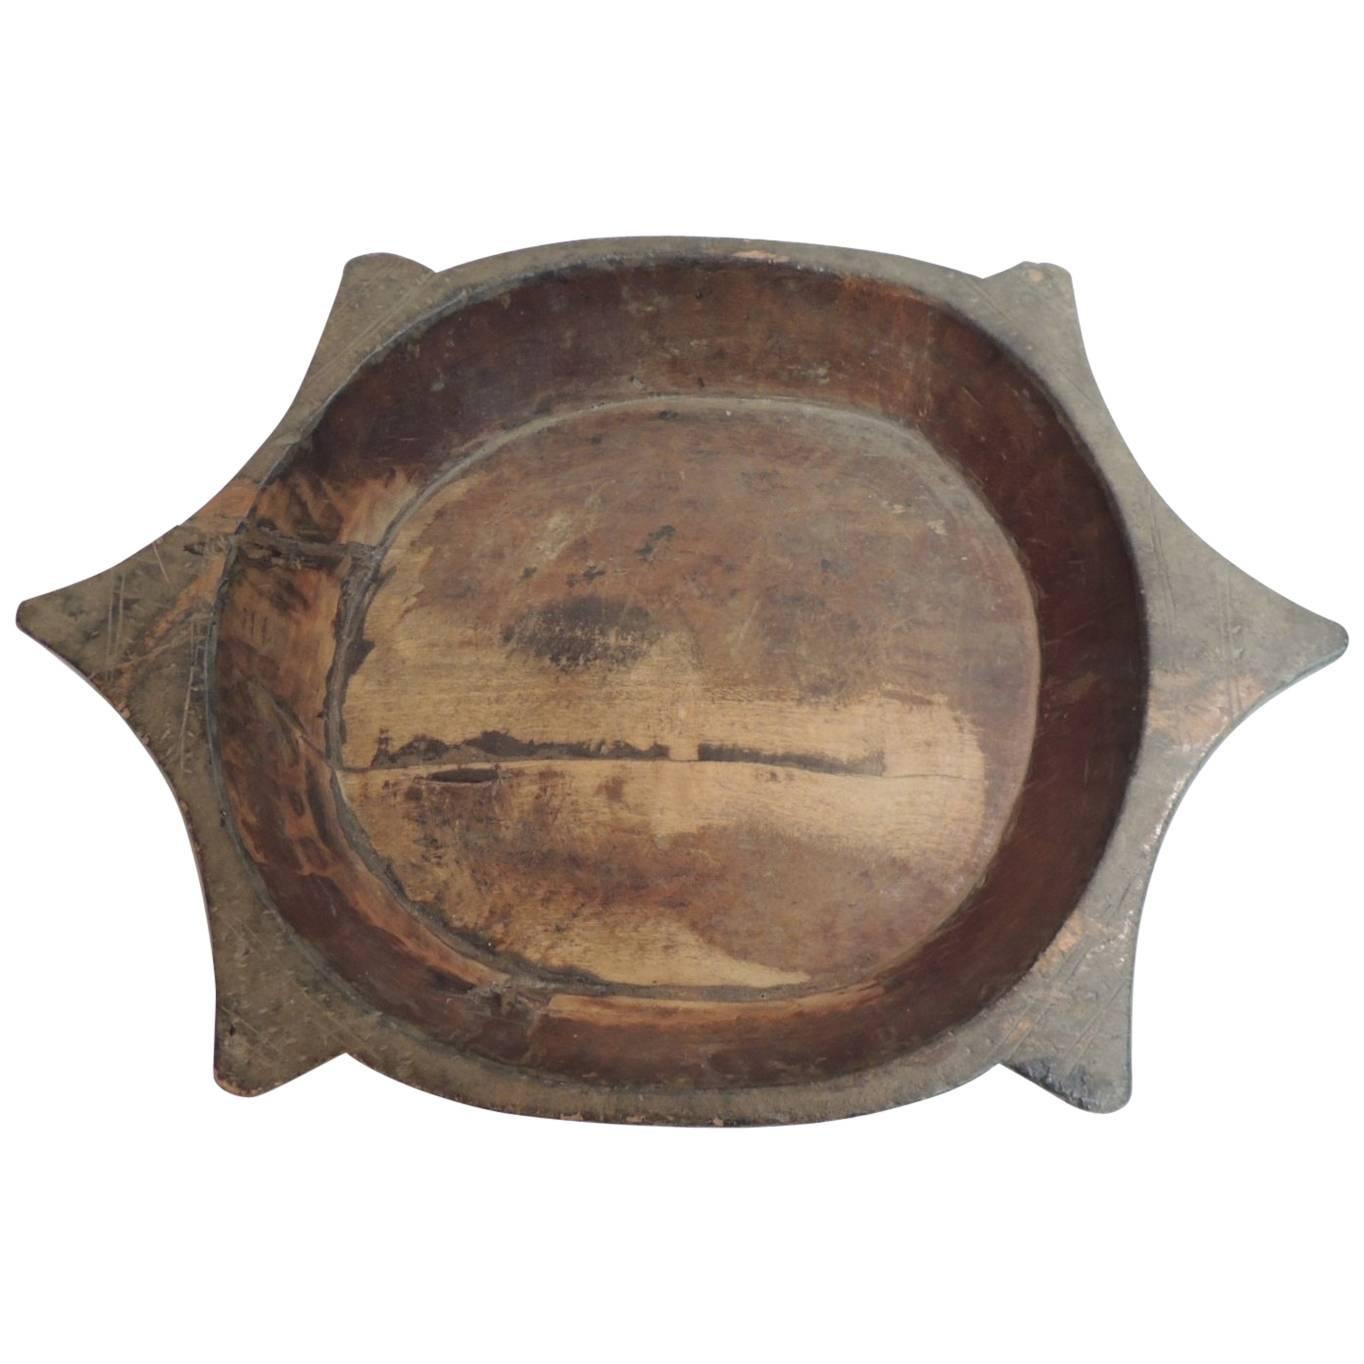 African Hand-Carved Wood Artisanal Serving Bowl